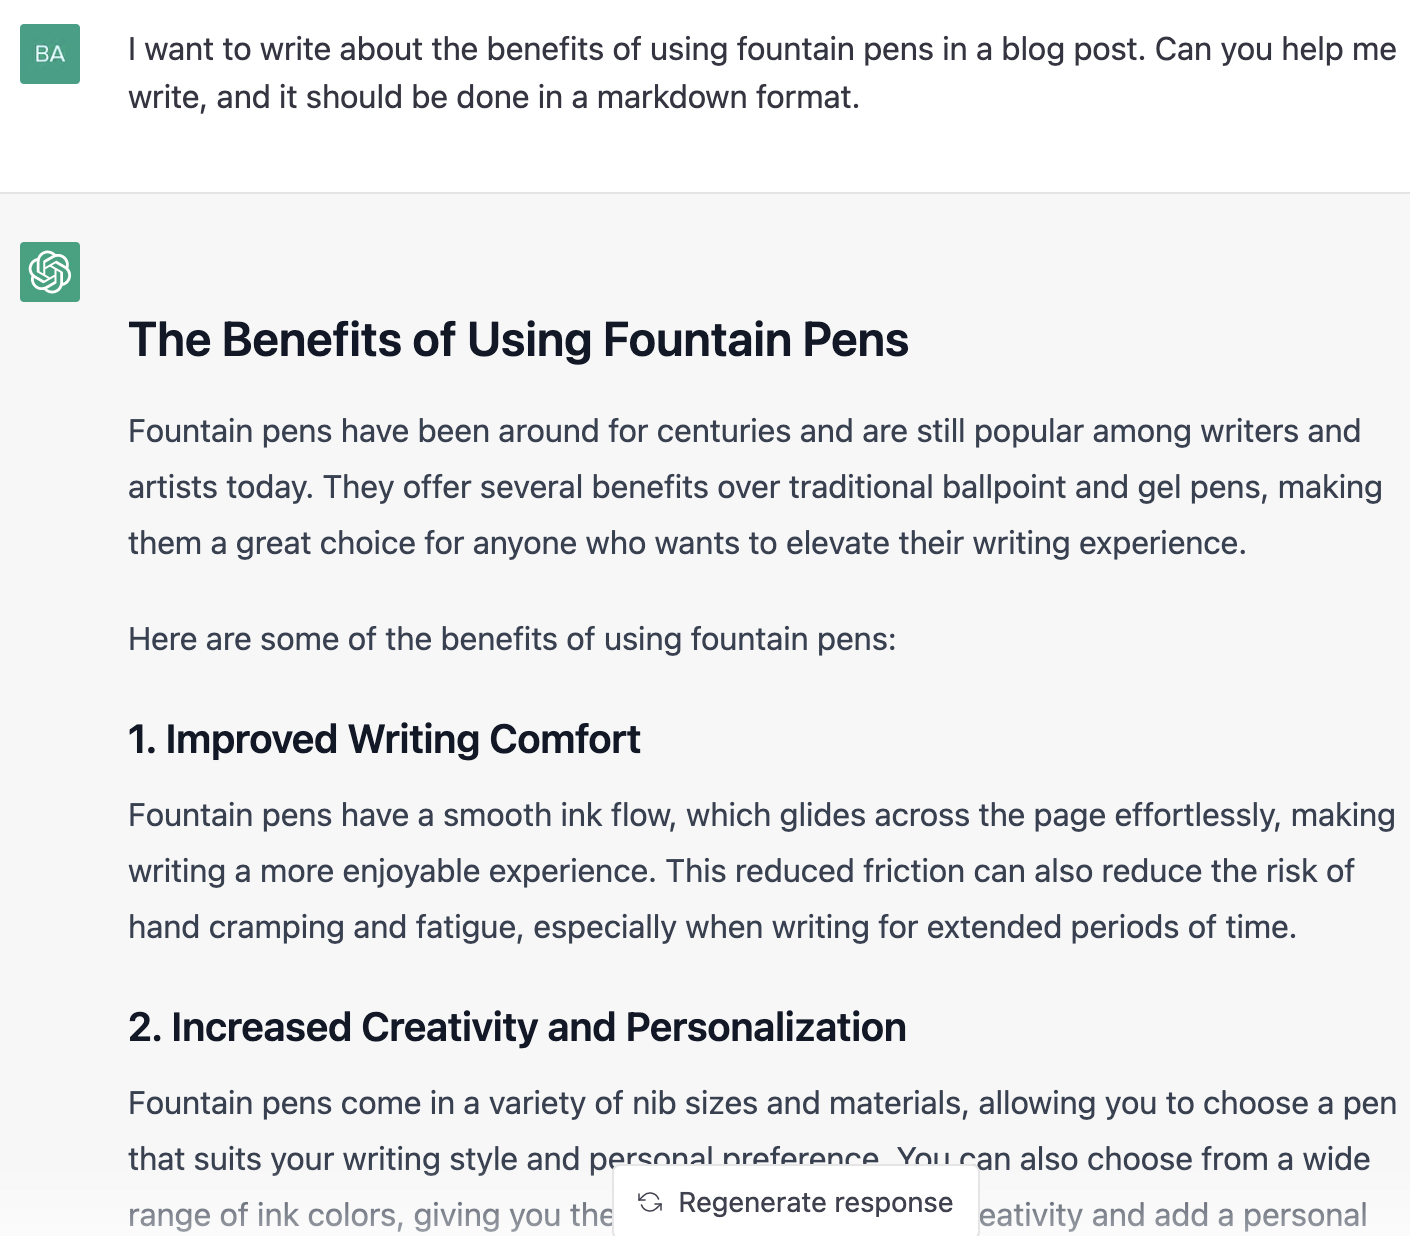 ChatGPT prompt about writing the benefits of using fountain pens in a blog post